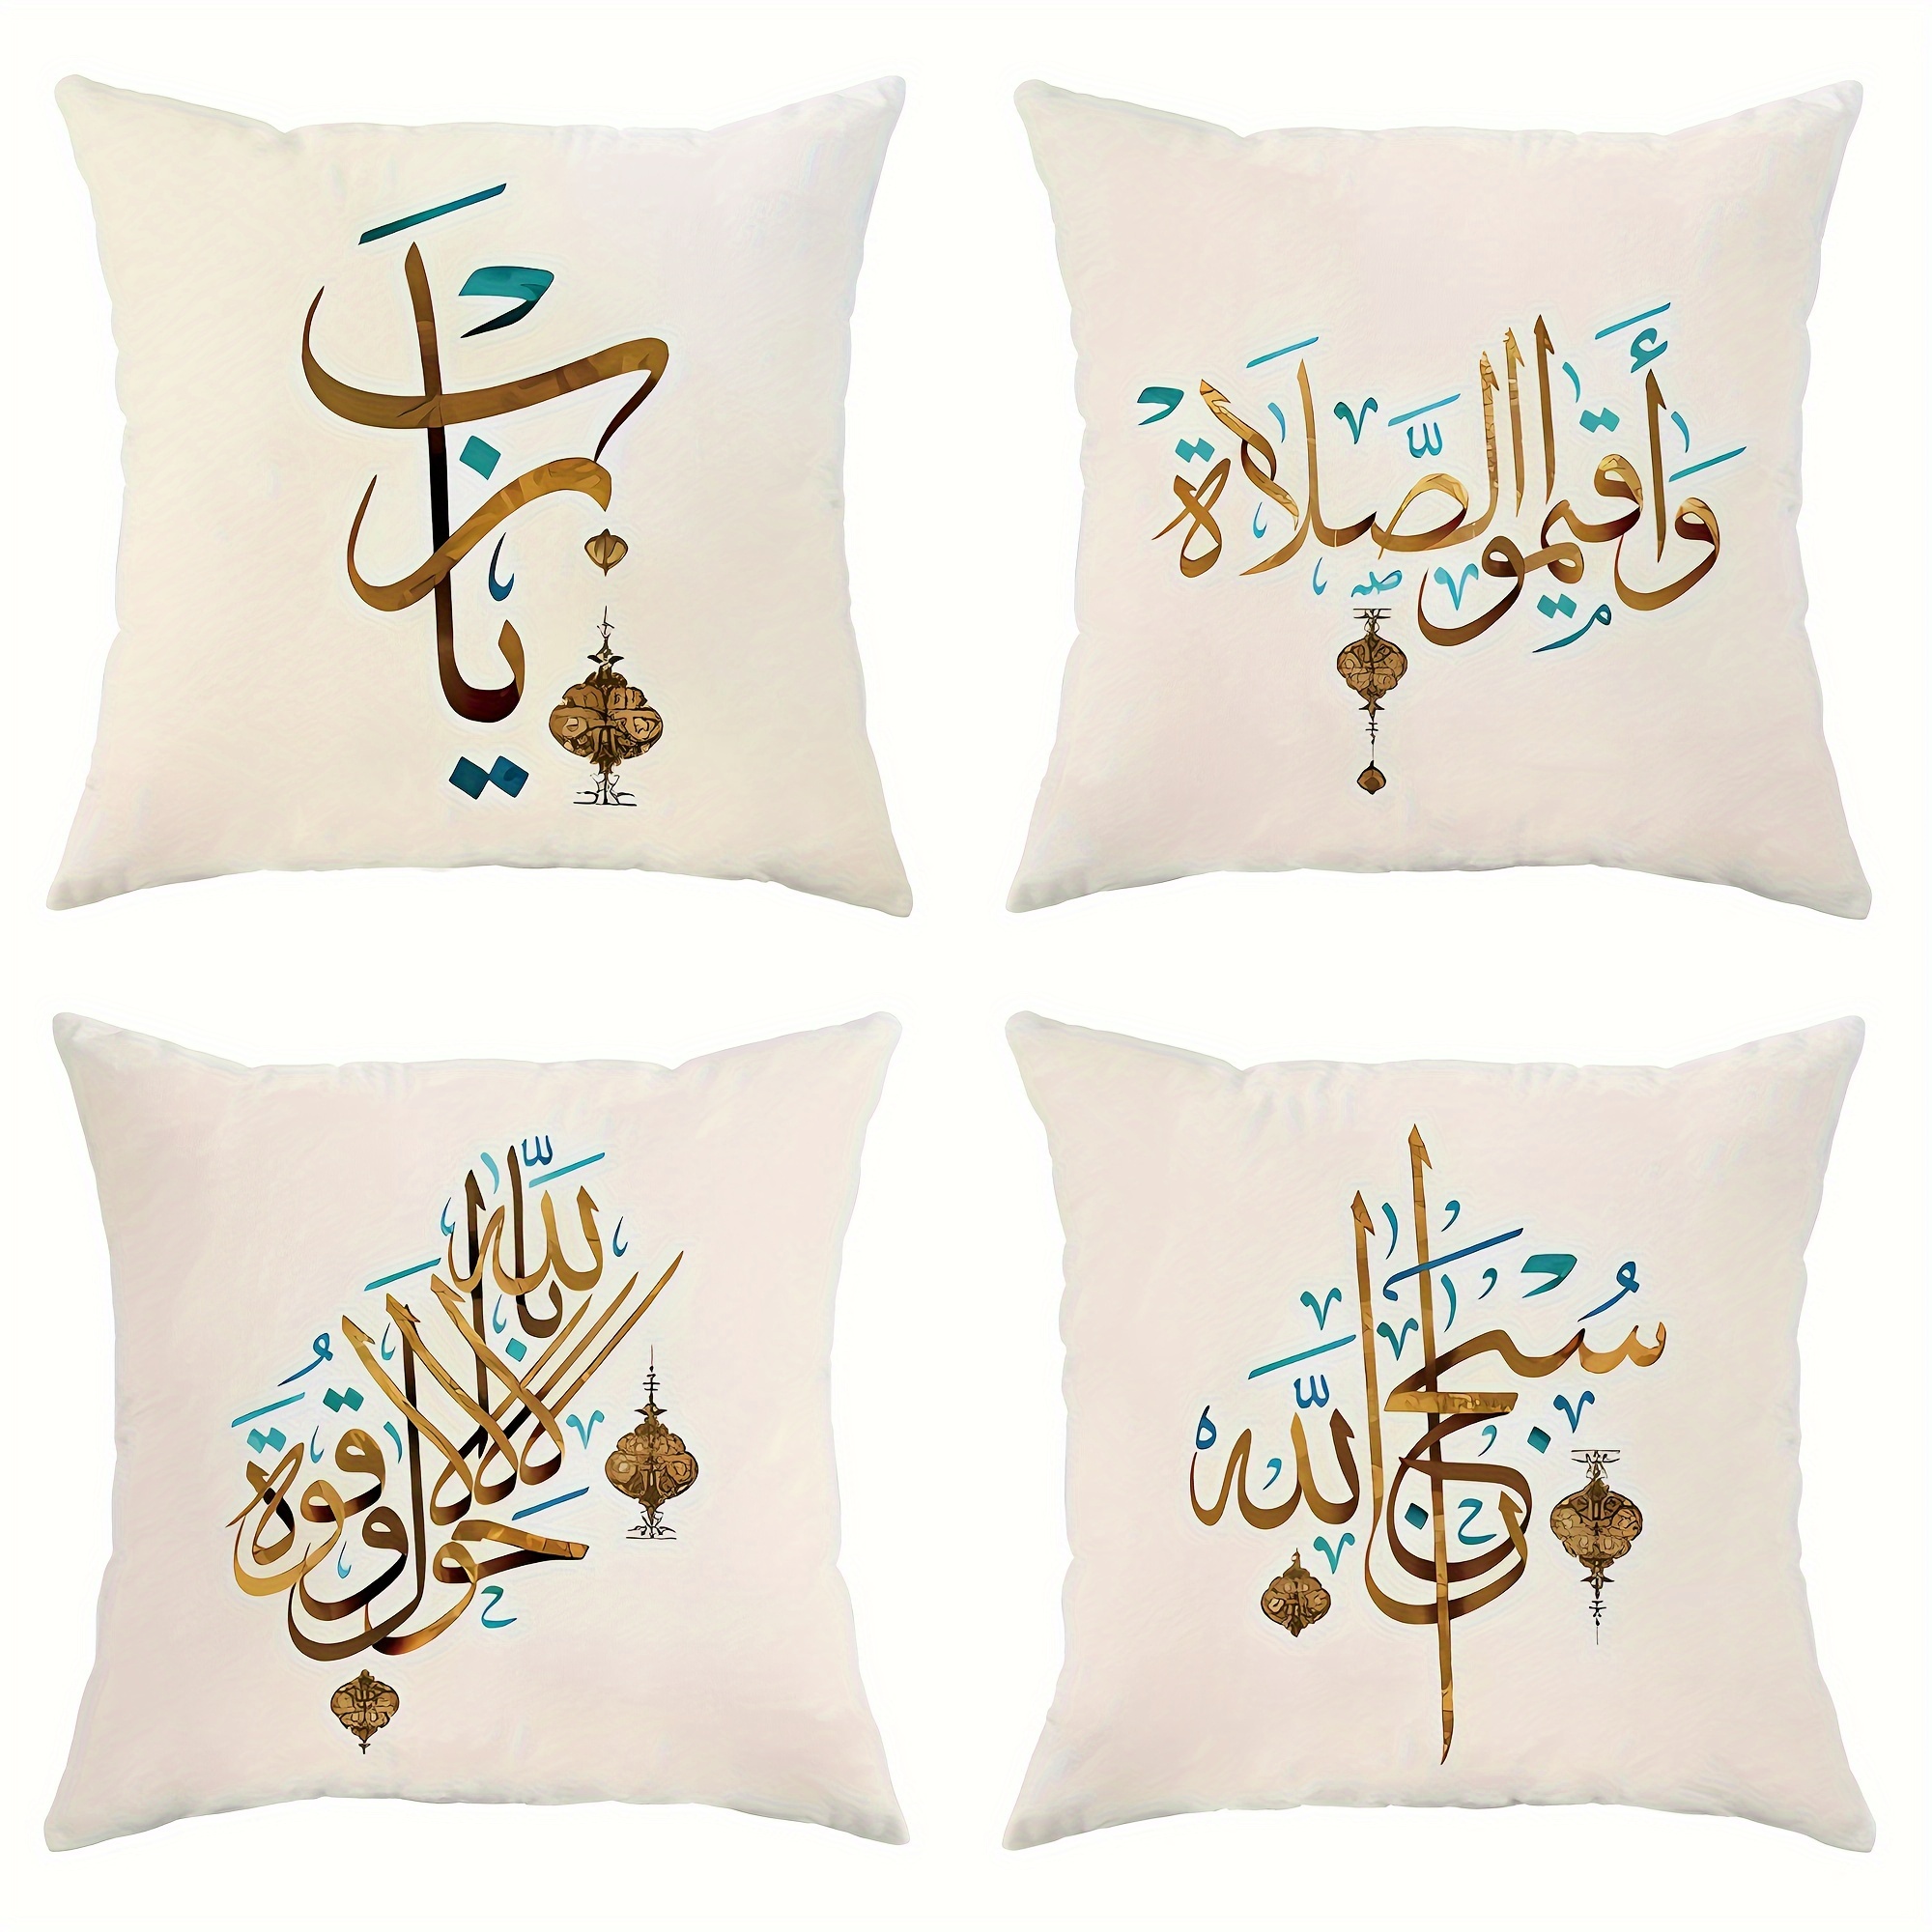 4pcs ramadan arabic calligraphy tan throw pillow covers ramadan simple throw pillow covers velvet decorative throw pillow covers 45 45cm 18 18 suitable for eid party living room bedroom sofa bed decoration gift no pillow core